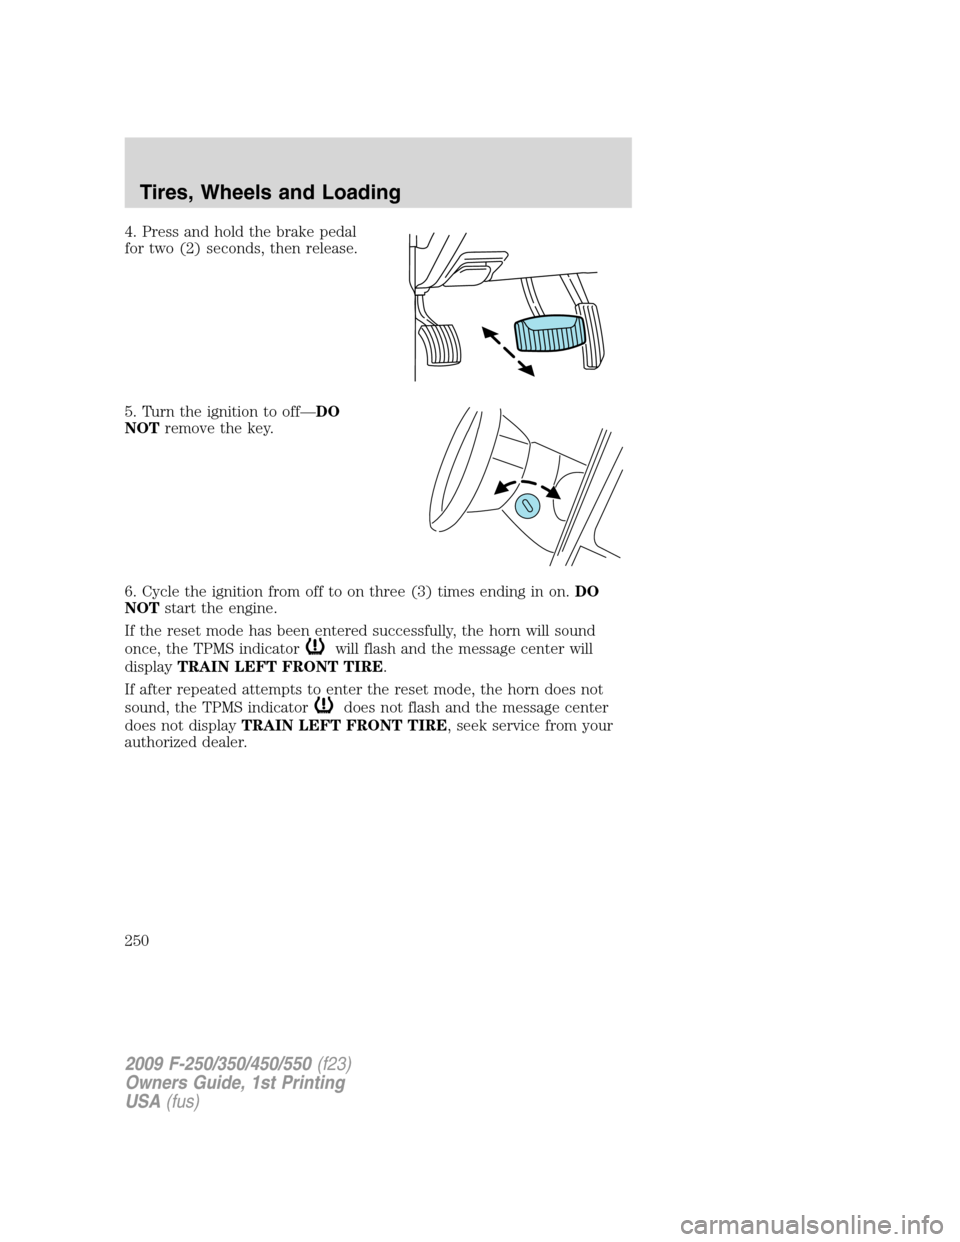 FORD SUPER DUTY 2009 2.G Owners Manual 4. Press and hold the brake pedal
for two (2) seconds, then release.
5. Turn the ignition to off—DO
NOTremove the key.
6. Cycle the ignition from off to on three (3) times ending in on.DO
NOTstart t